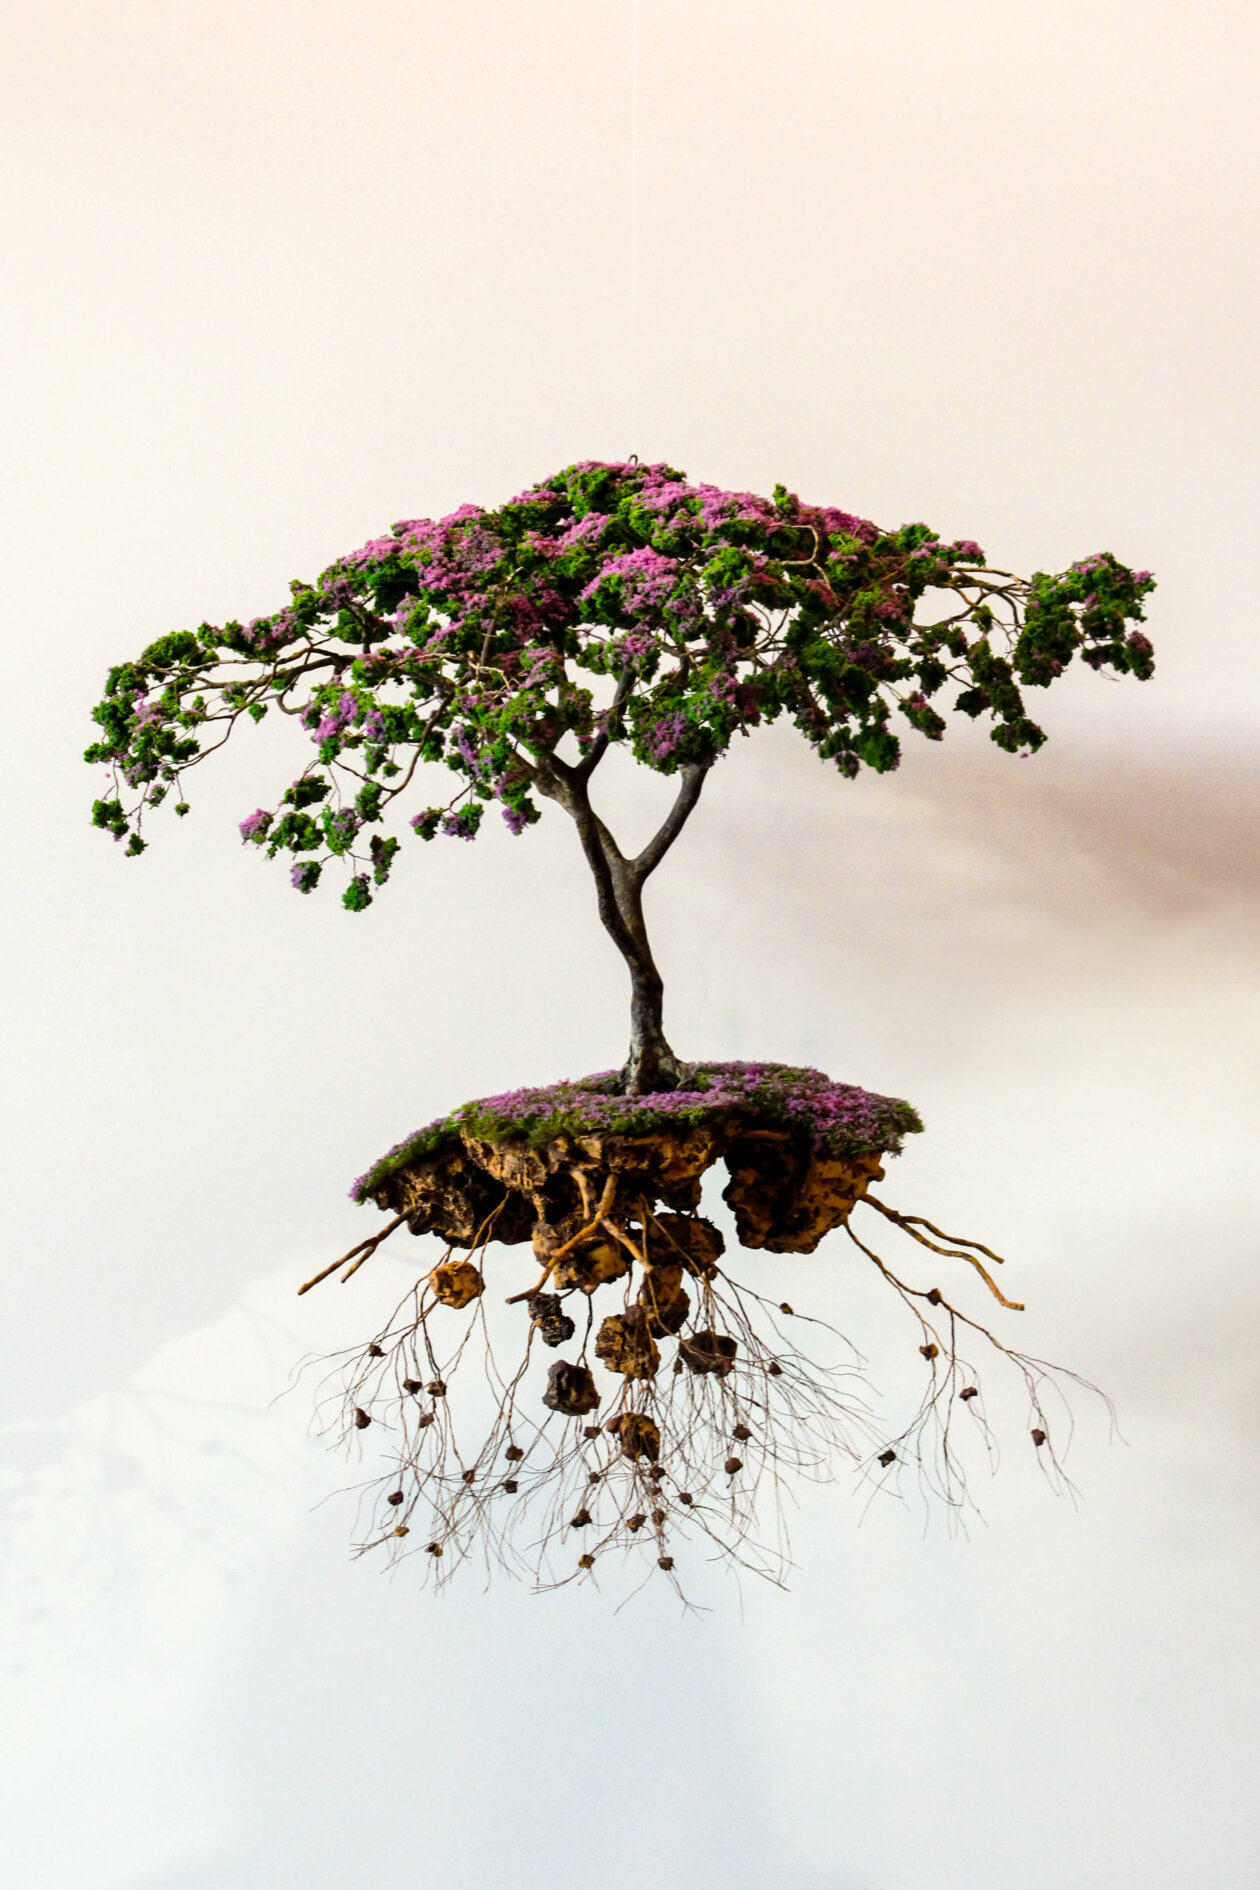 Incredible Sculptures Of Miniaturized Landscapes By Jorge Mayet 4